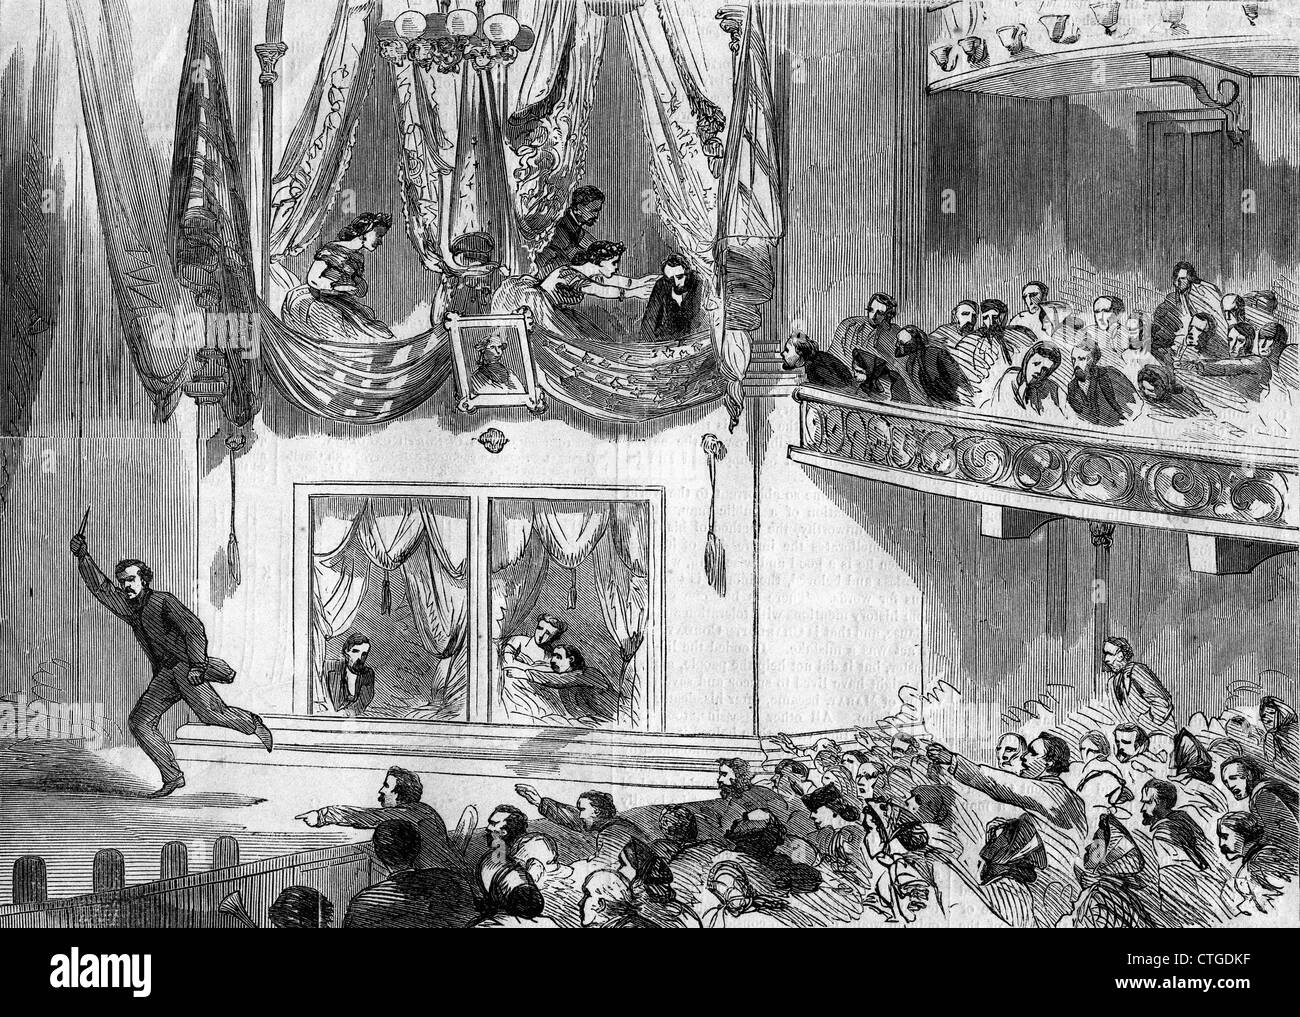 1860s APRIL 15 1865 ASSASSINATION OF PRESIDENT LINCOLN AT FORD'S THEATER JOHN WILKES BOOTH FLEEING SHOUTING SIC SEMPER TYRANNIS Stock Photo